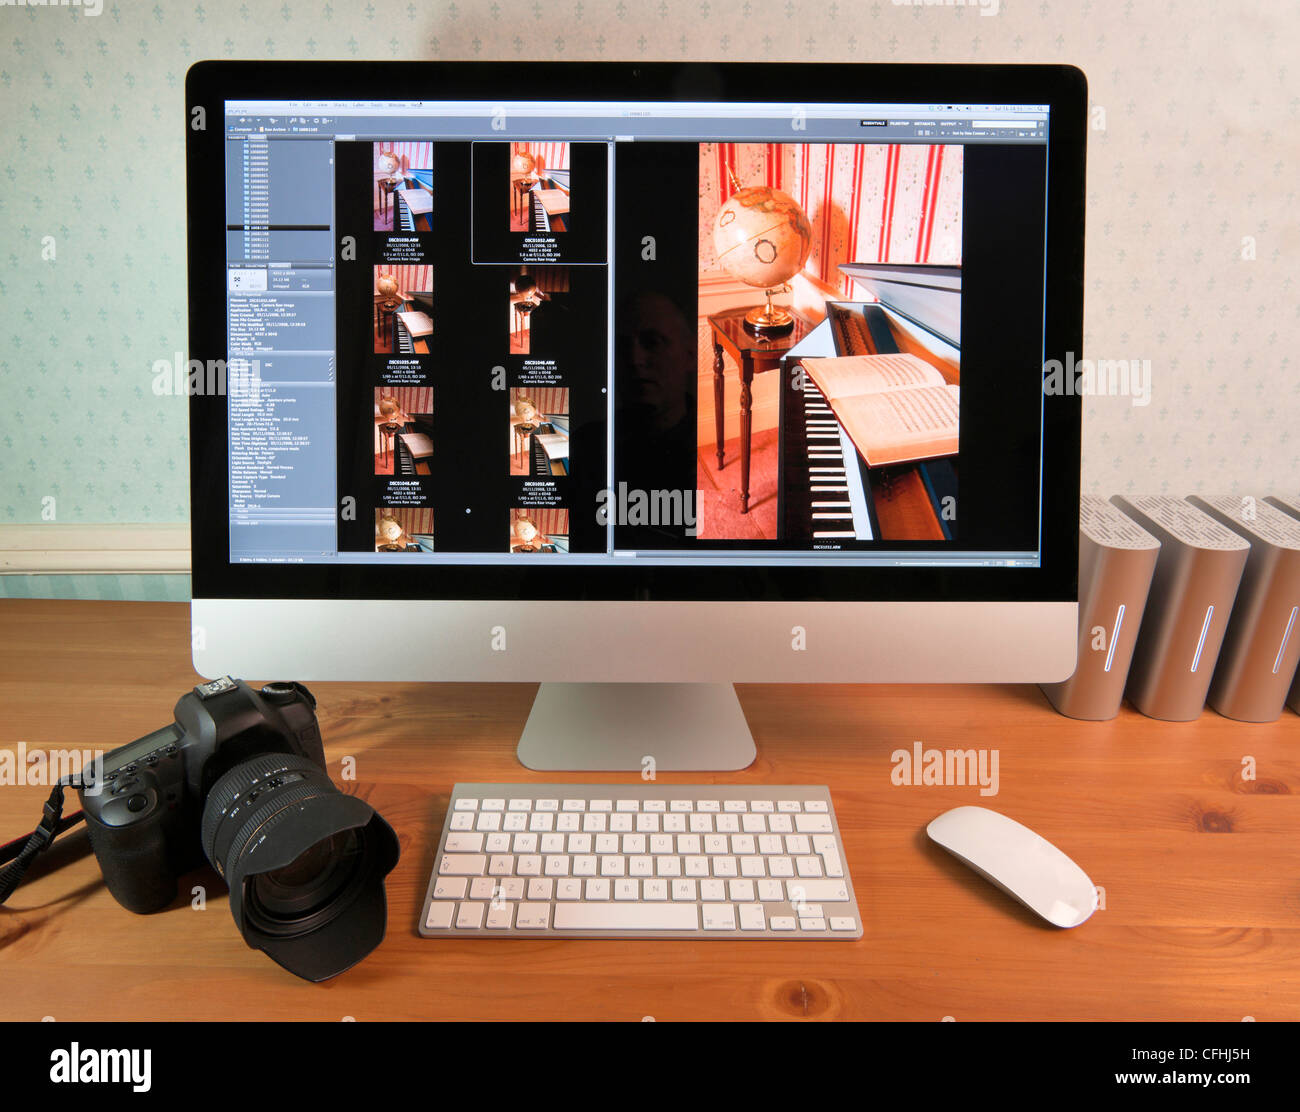 Apple iMac 27" i7 with DSLR camera keyboard and mouse external disks photo  browsing software - retouched to remove logos Stock Photo - Alamy